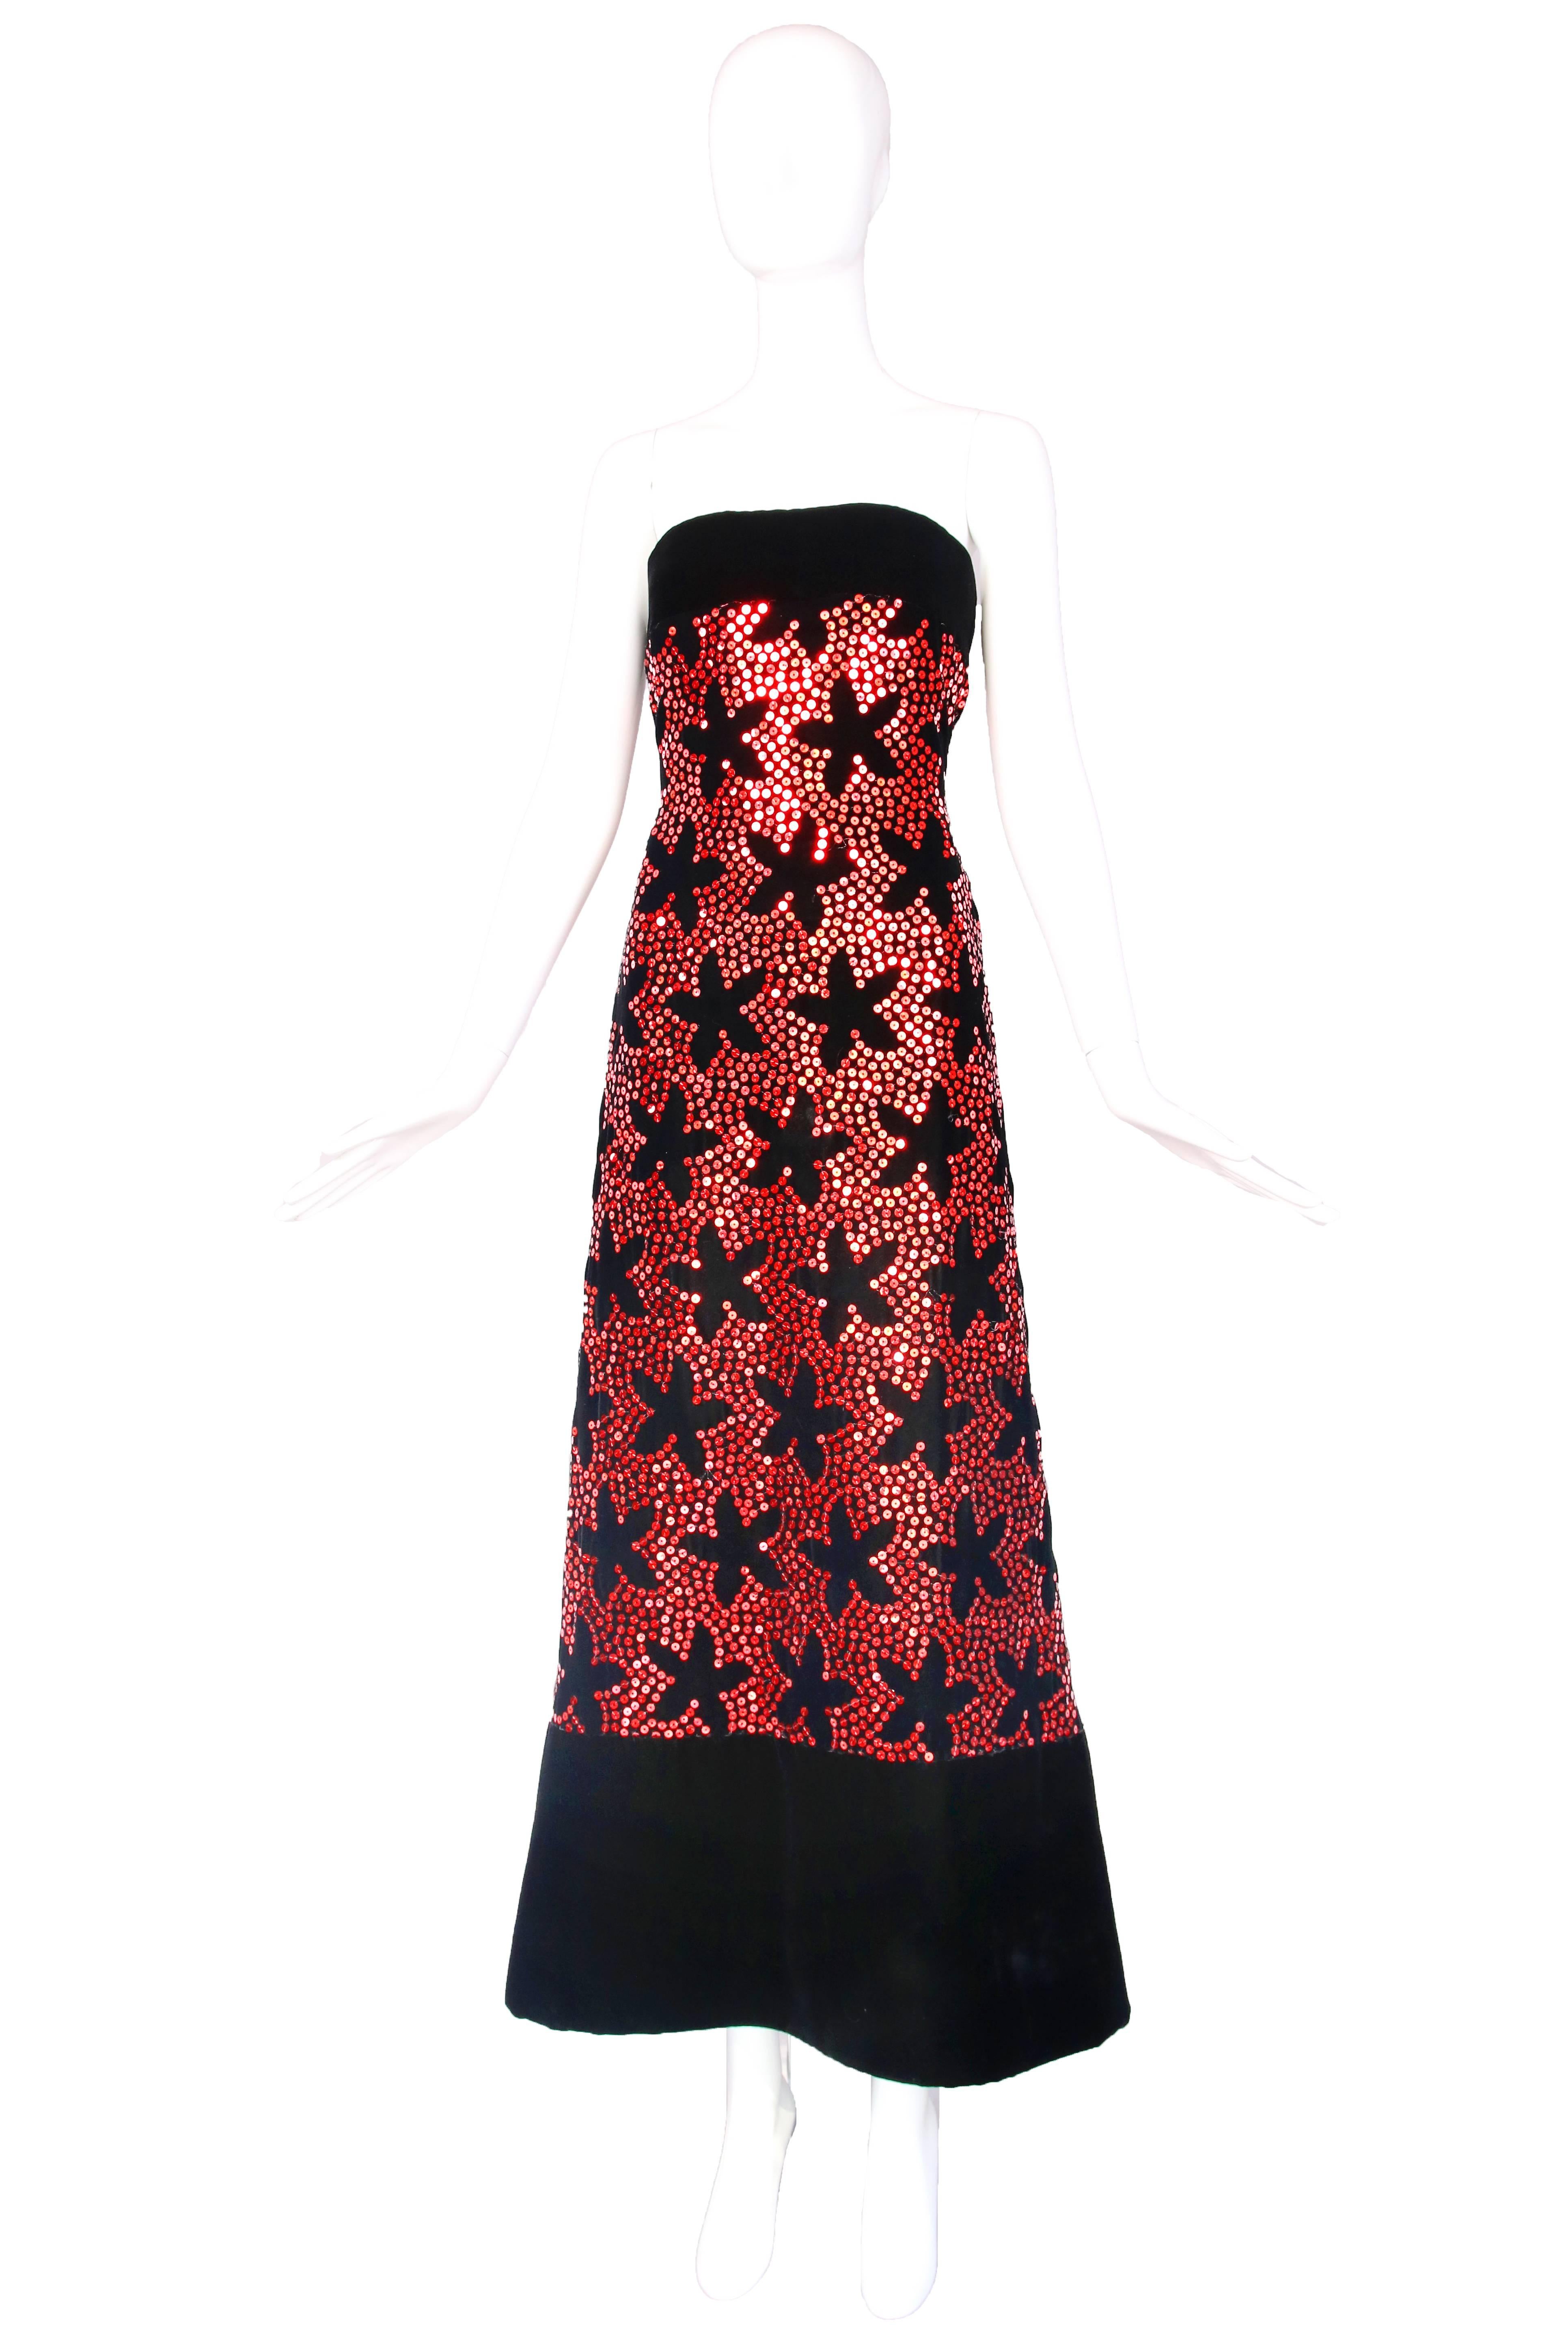 1980's Arnold Scaasi black velvet strapless evening gown with allover red sequin floral print. In excellent condition with minor sequin loss at back zipper. Size 6.
MEASUREMENTS:
Bust - 34